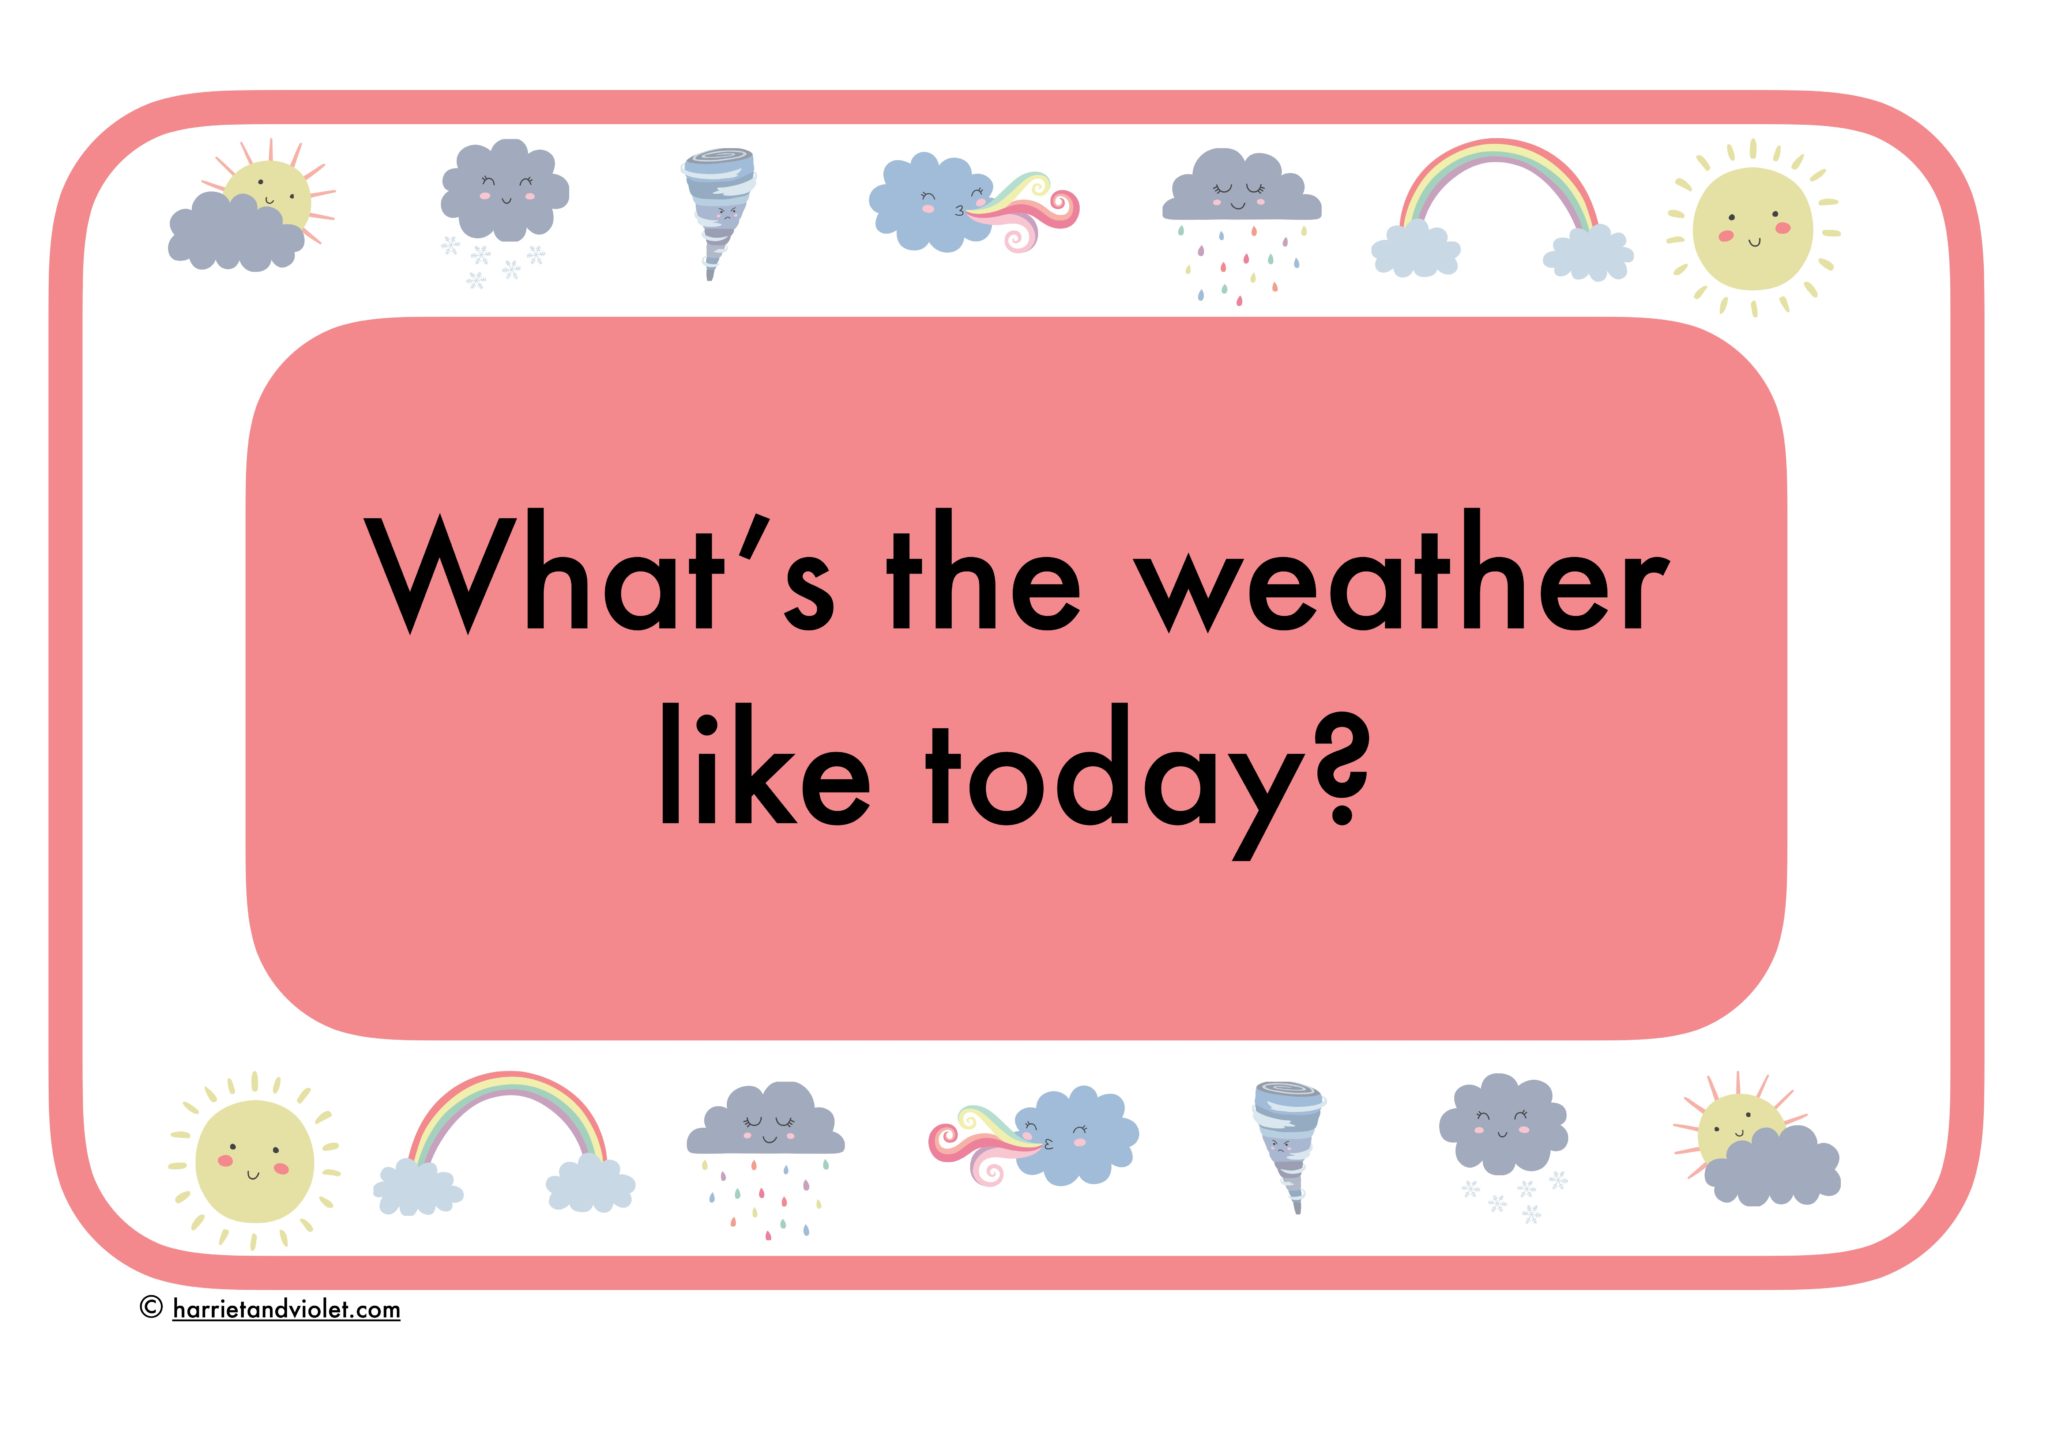 Weather like. What`s the weather like today. What is the weather today. What is the weather like. Weather like today.